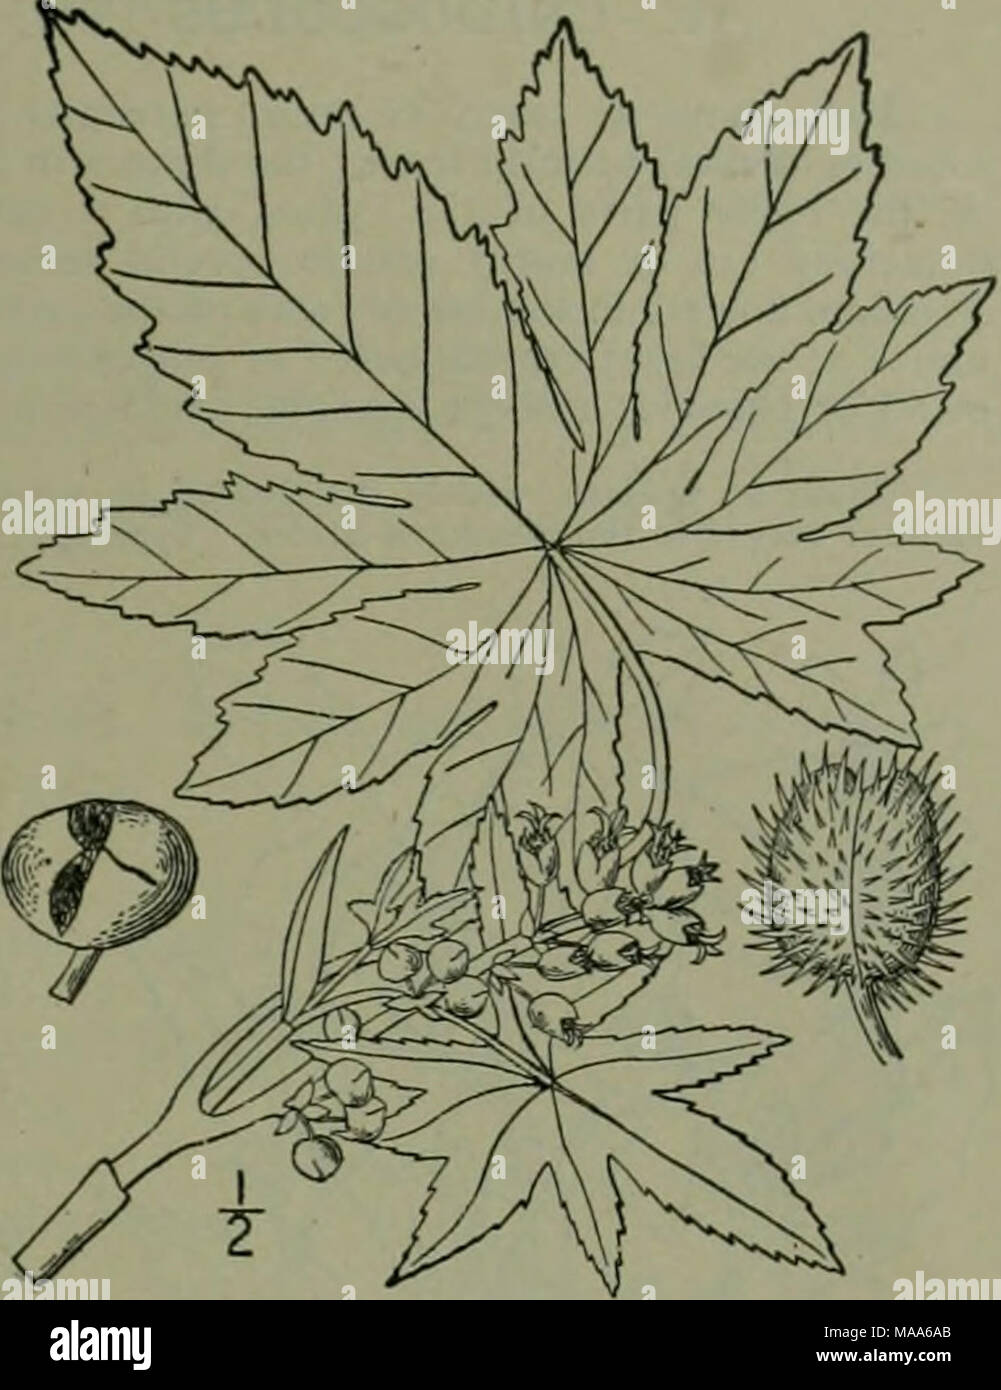 . An illustrated flora of the northern United States, Canada and the British possessions : from Newfoundland to the parallel of the southern boundary of Virginia and from the Atlantic Ocean westward to the 102nd meridian . 10. STILLINGIA Garden ; L. Irant. i: 19, 126. 1767. Monoecious glabrous herbs or shrubs, with simple or branched stems, alternate or rarely opposite, entire or toothed leaves, often with 2 glands at the base, the flowers bracteolate, in terminal spikes, apetalous, the bracllets 2-glandular. Staminate flowers several together in the axils of the bractlets, the calyx slightly Stock Photo